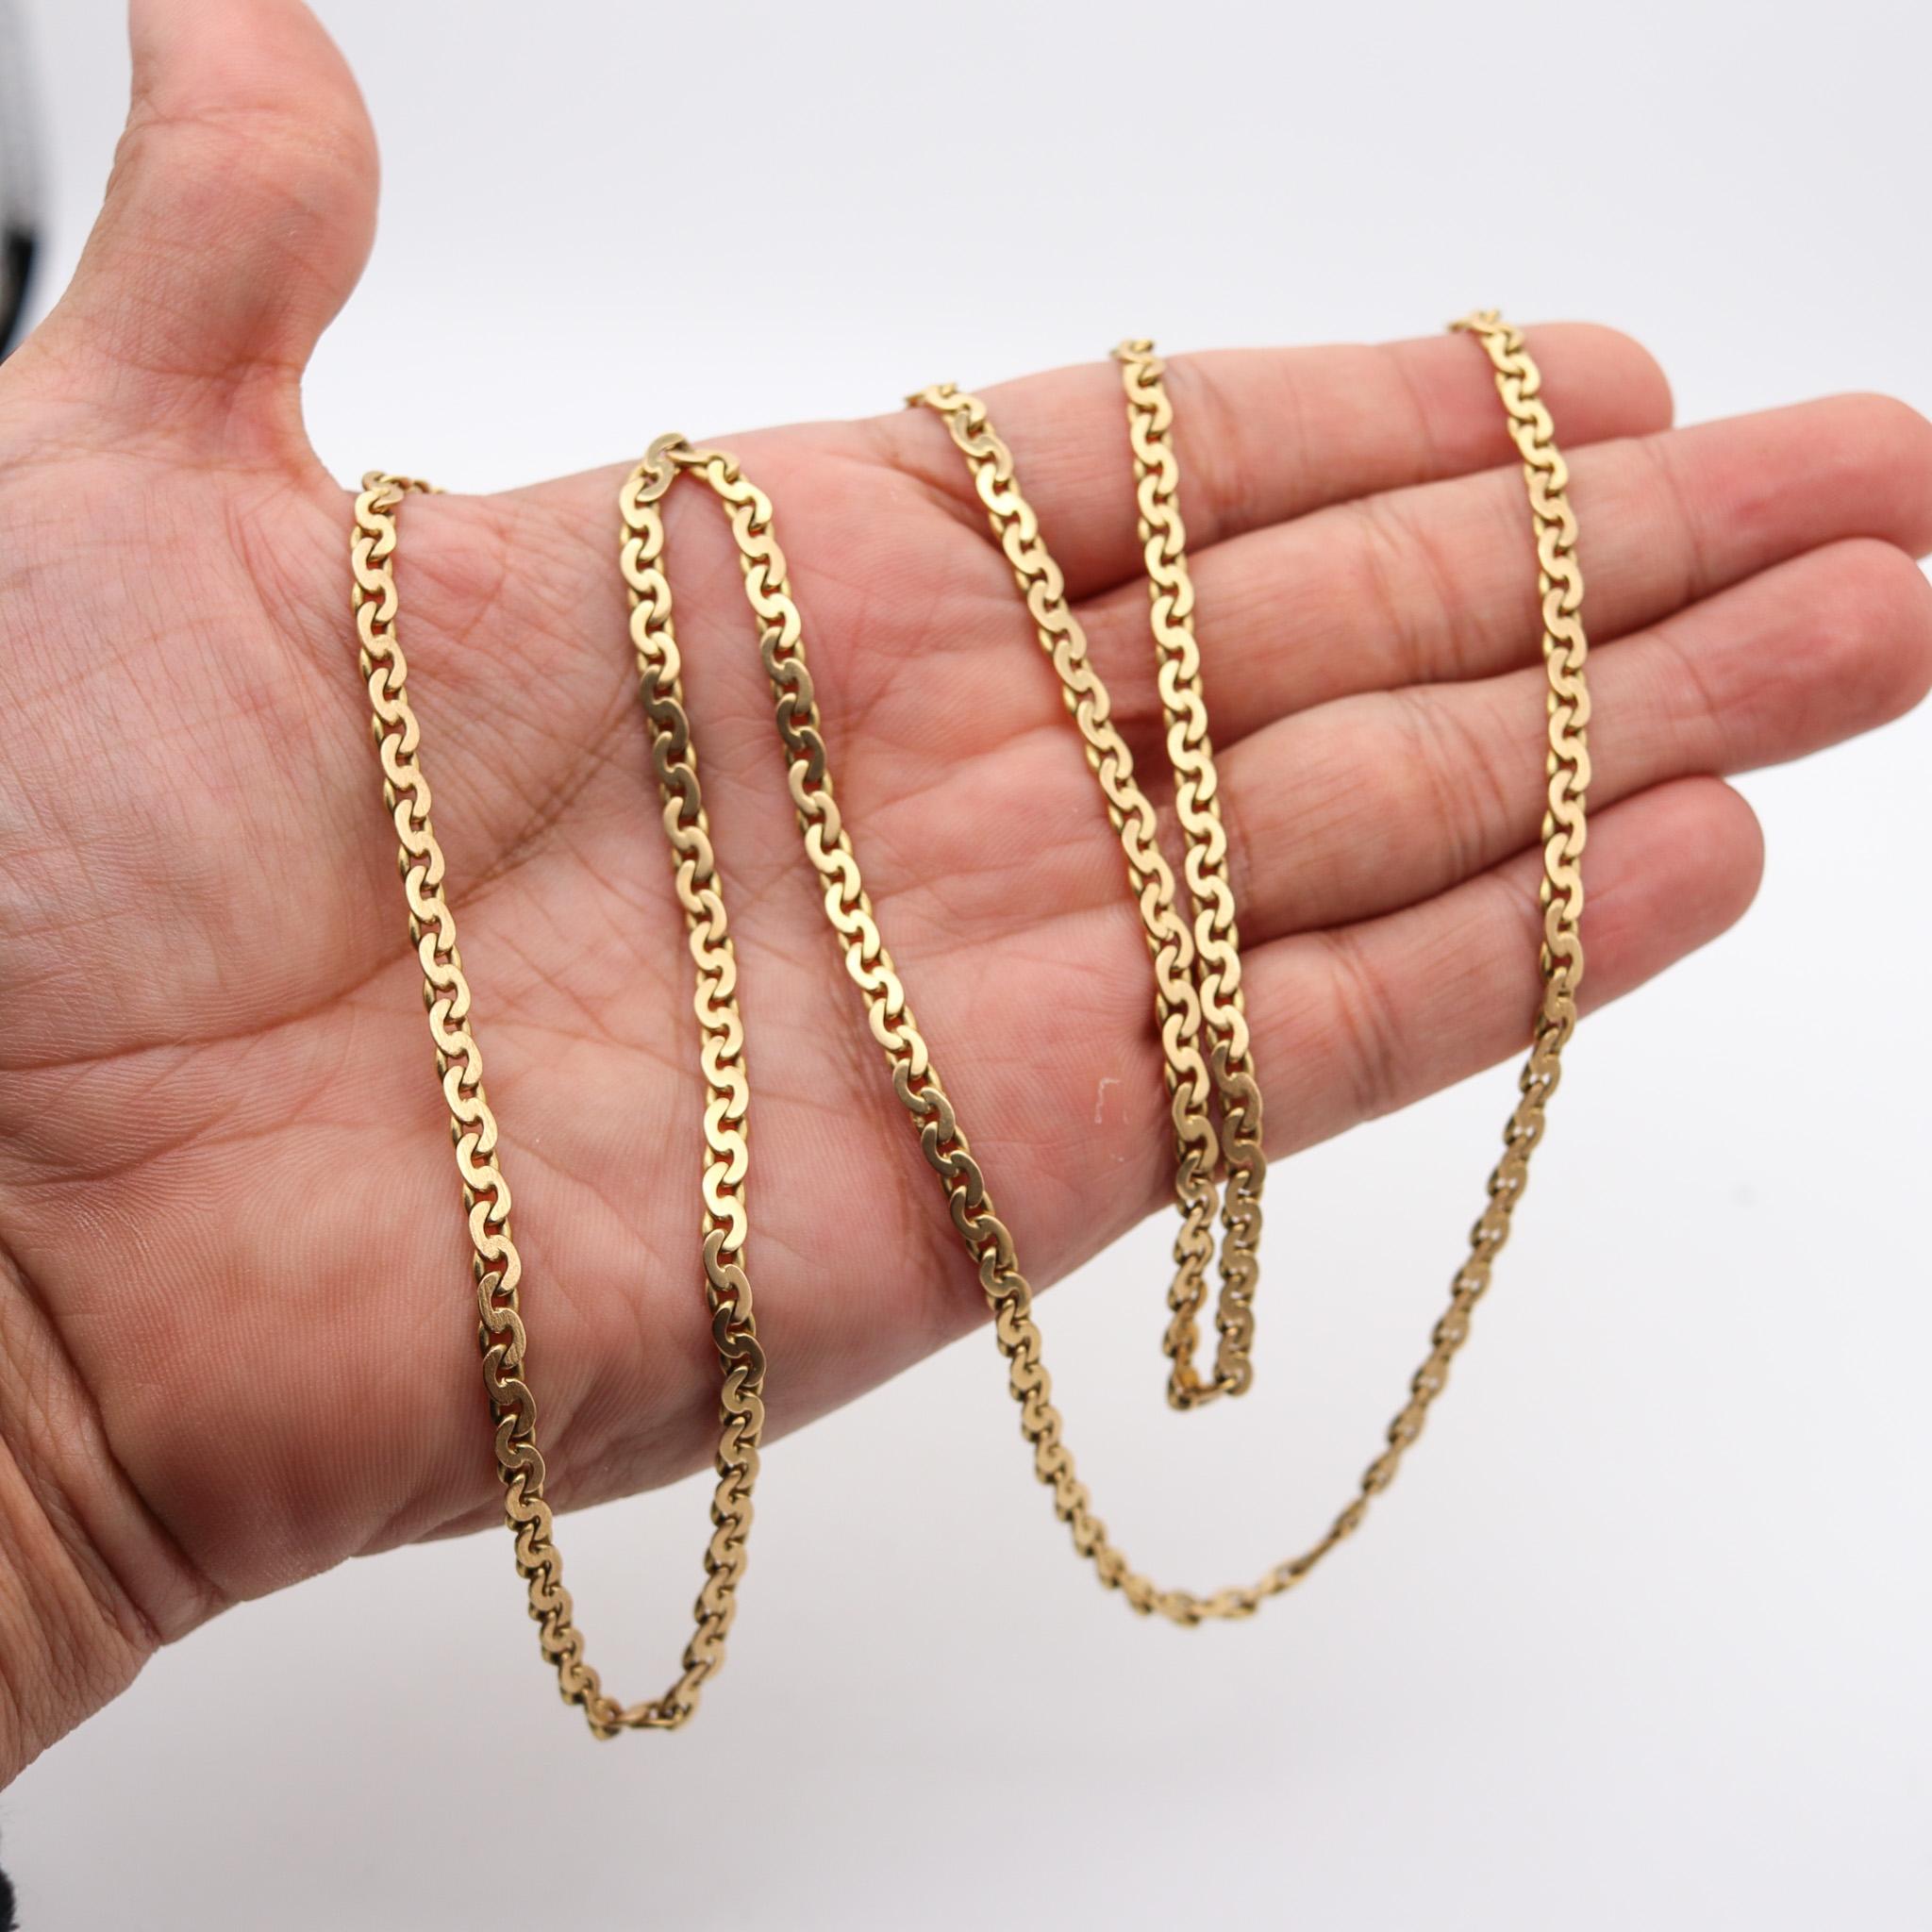 Marchisio Napoleone 1935 Italian Art Deco Long Chain In Solid 18Kt Yellow Gold For Sale 3